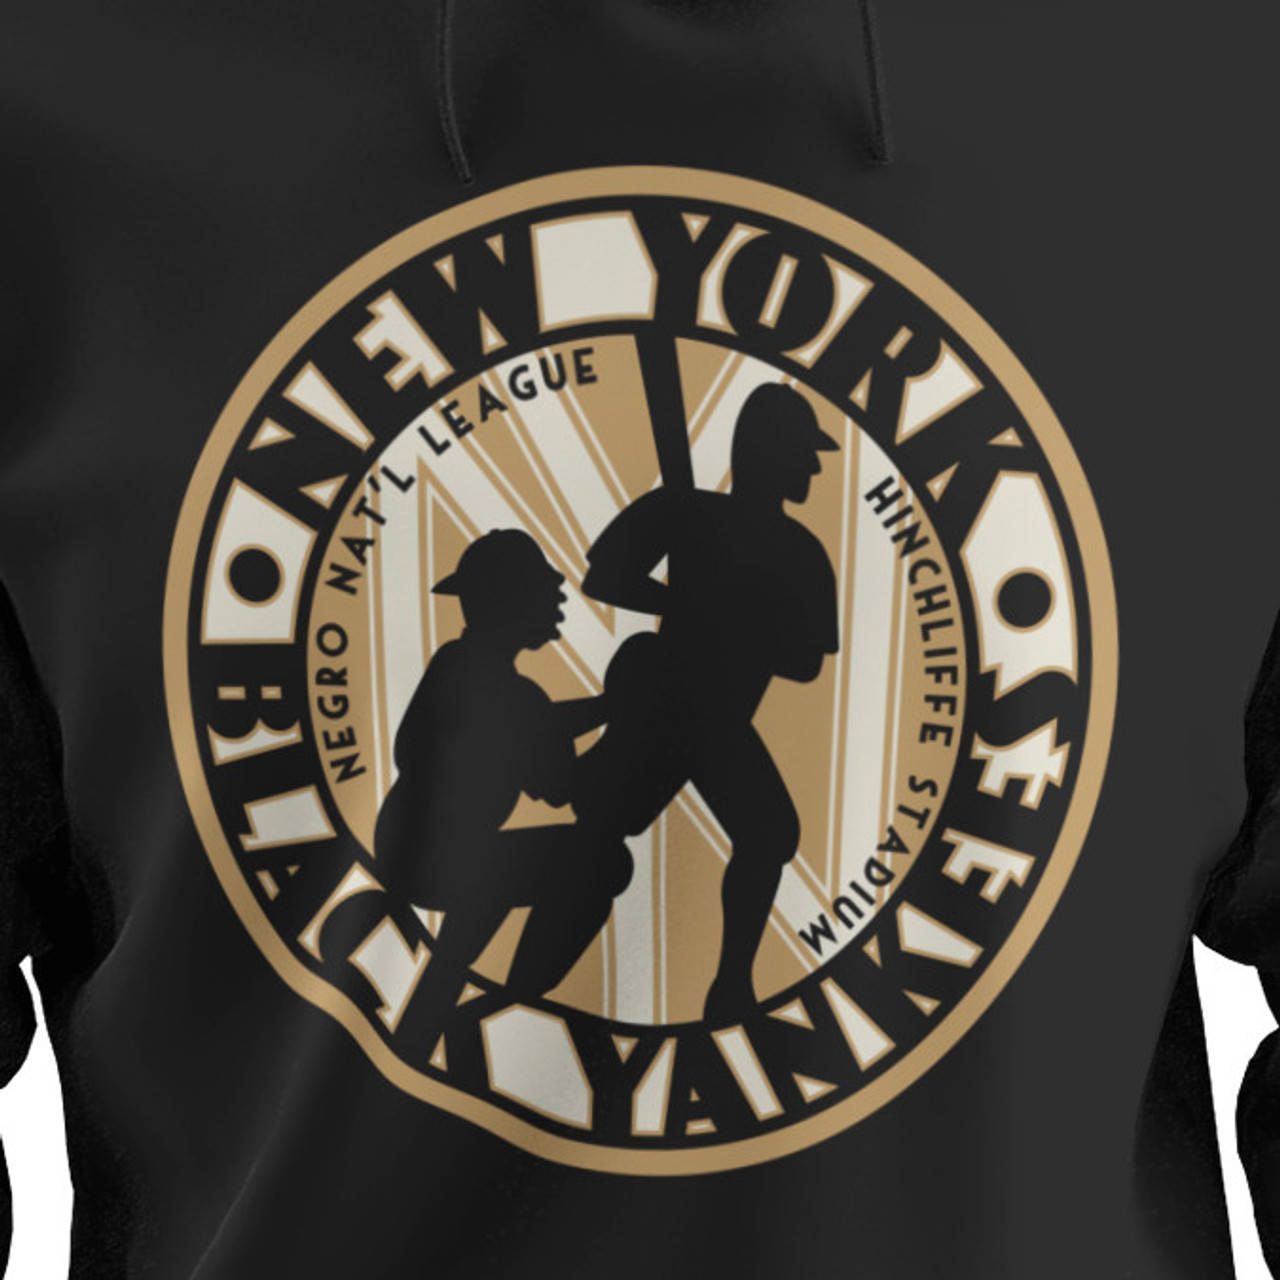 Shop Black Firday NY Black Yankees Sweatshirt at Best Price in